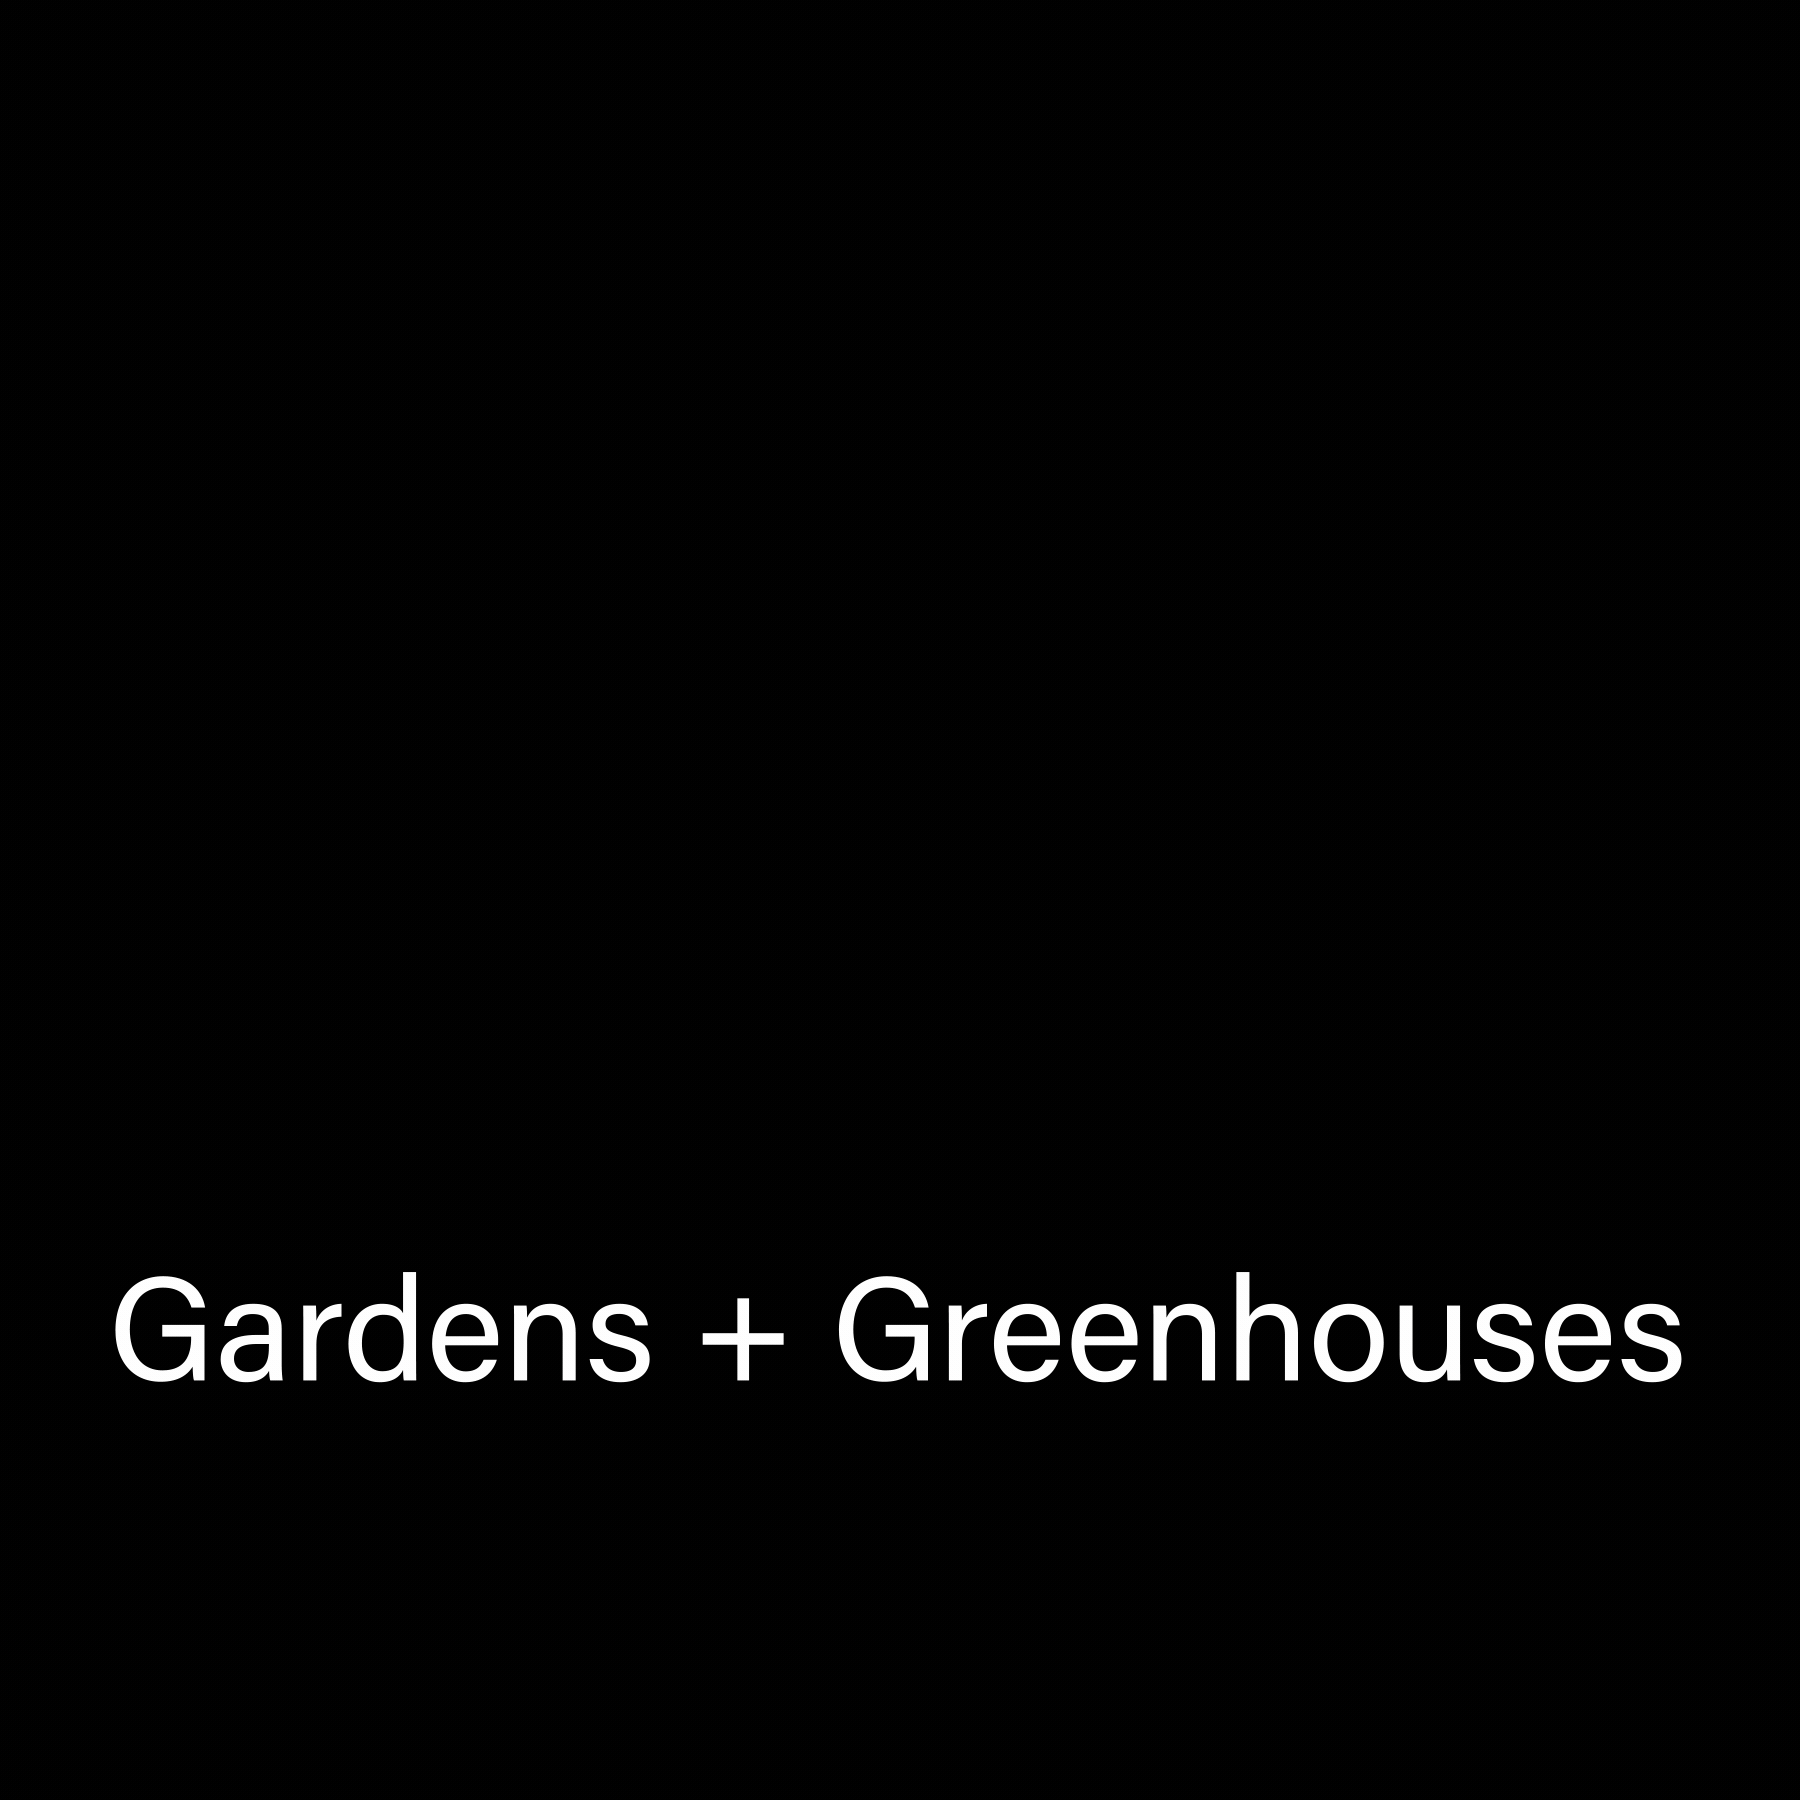 Gardens and Greenhouses